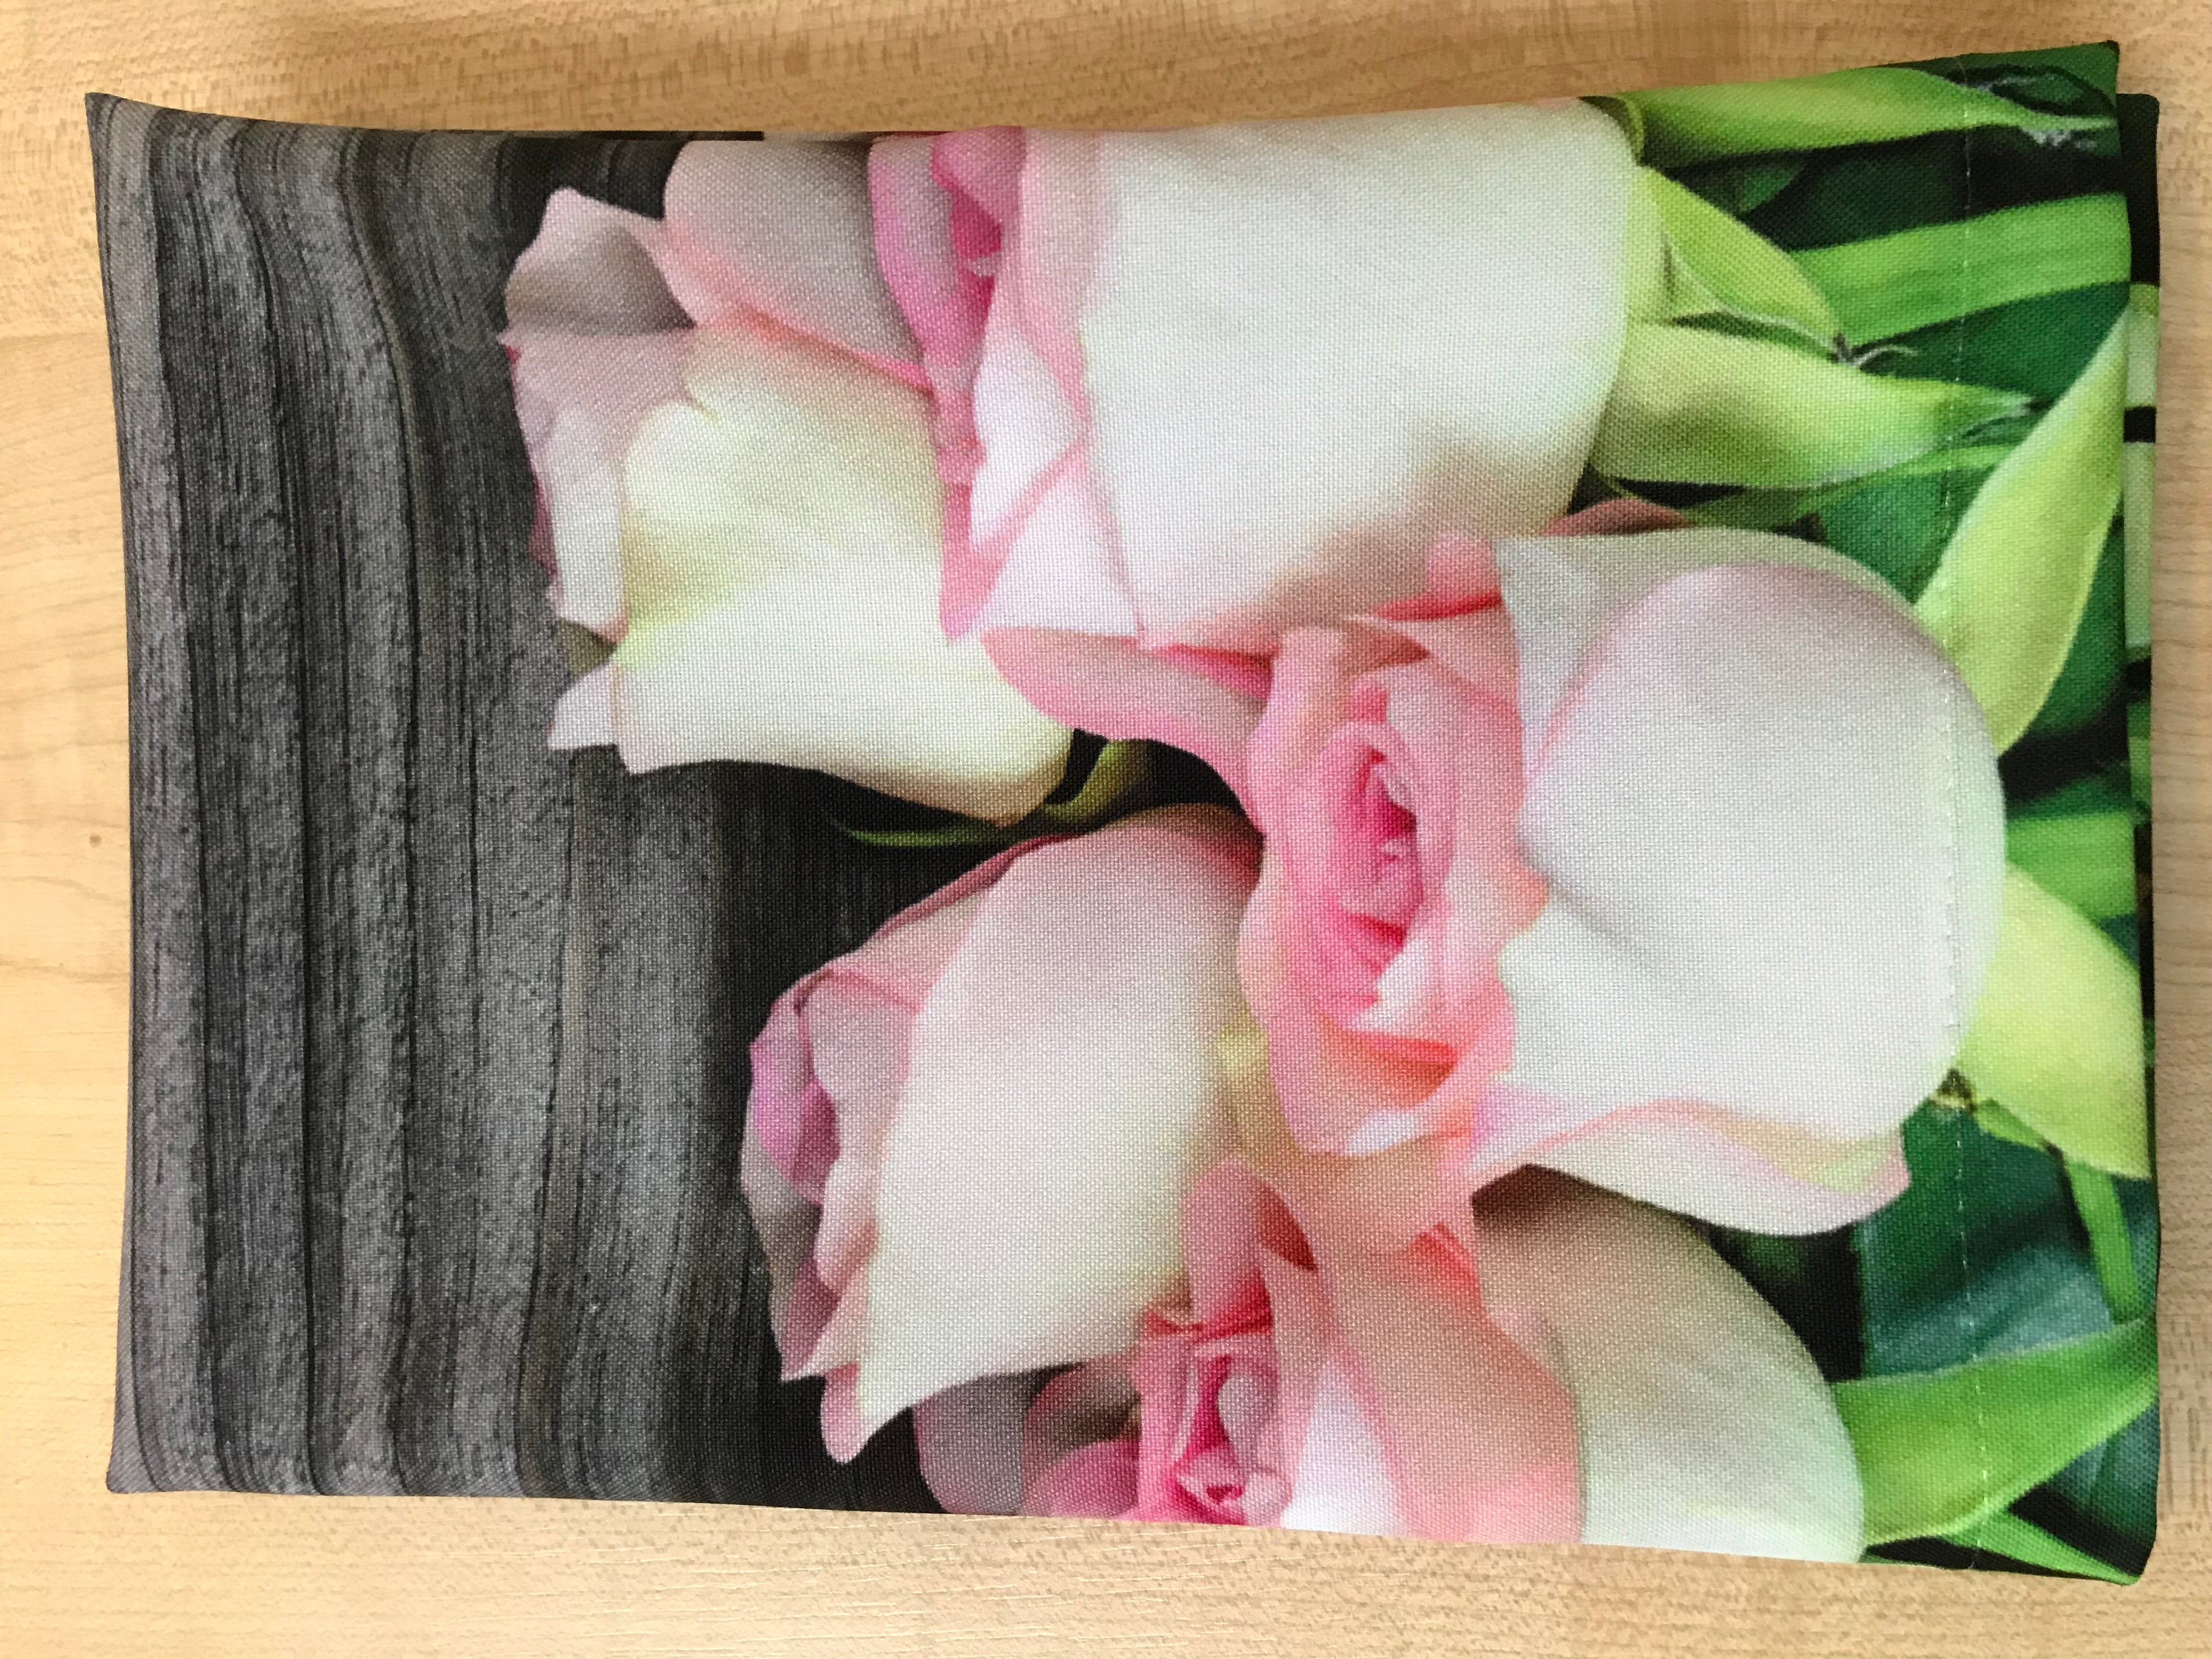 Tablecloth Roses and wood - Wellmira